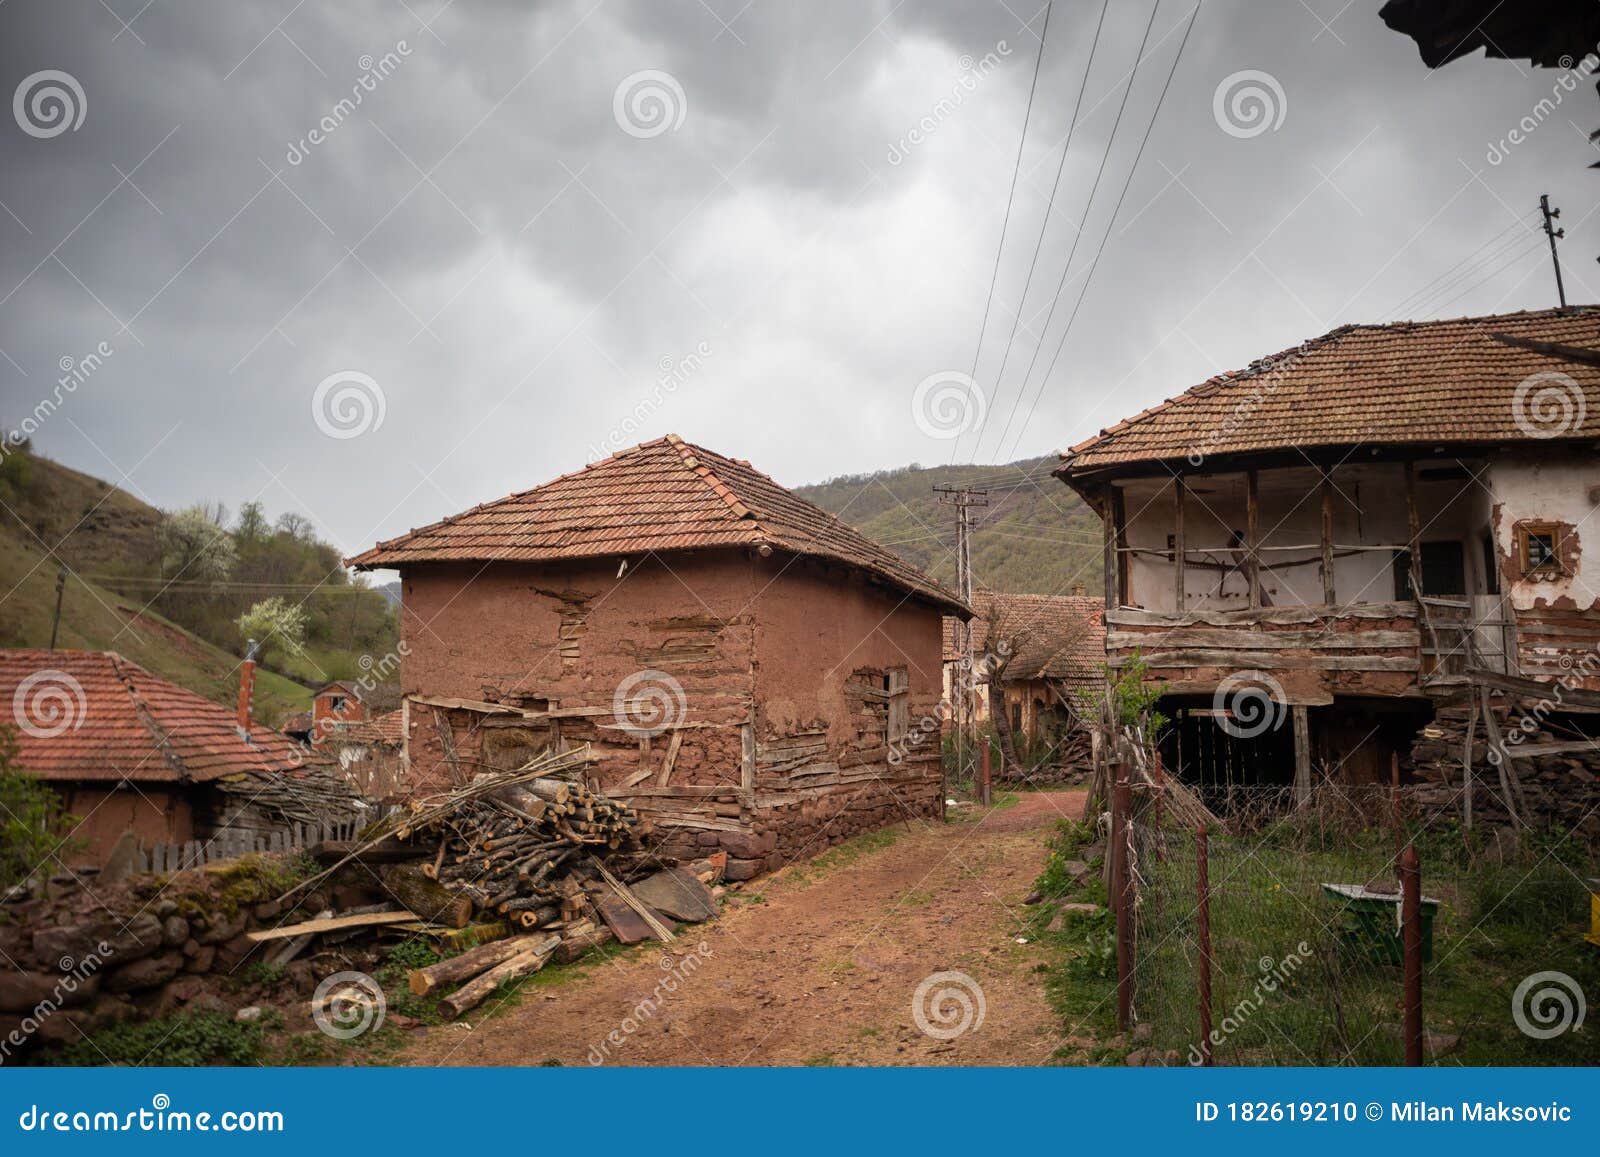 Old Rustic Idyllic Houses in a Village Topli Do Stock Photo - Image of ...